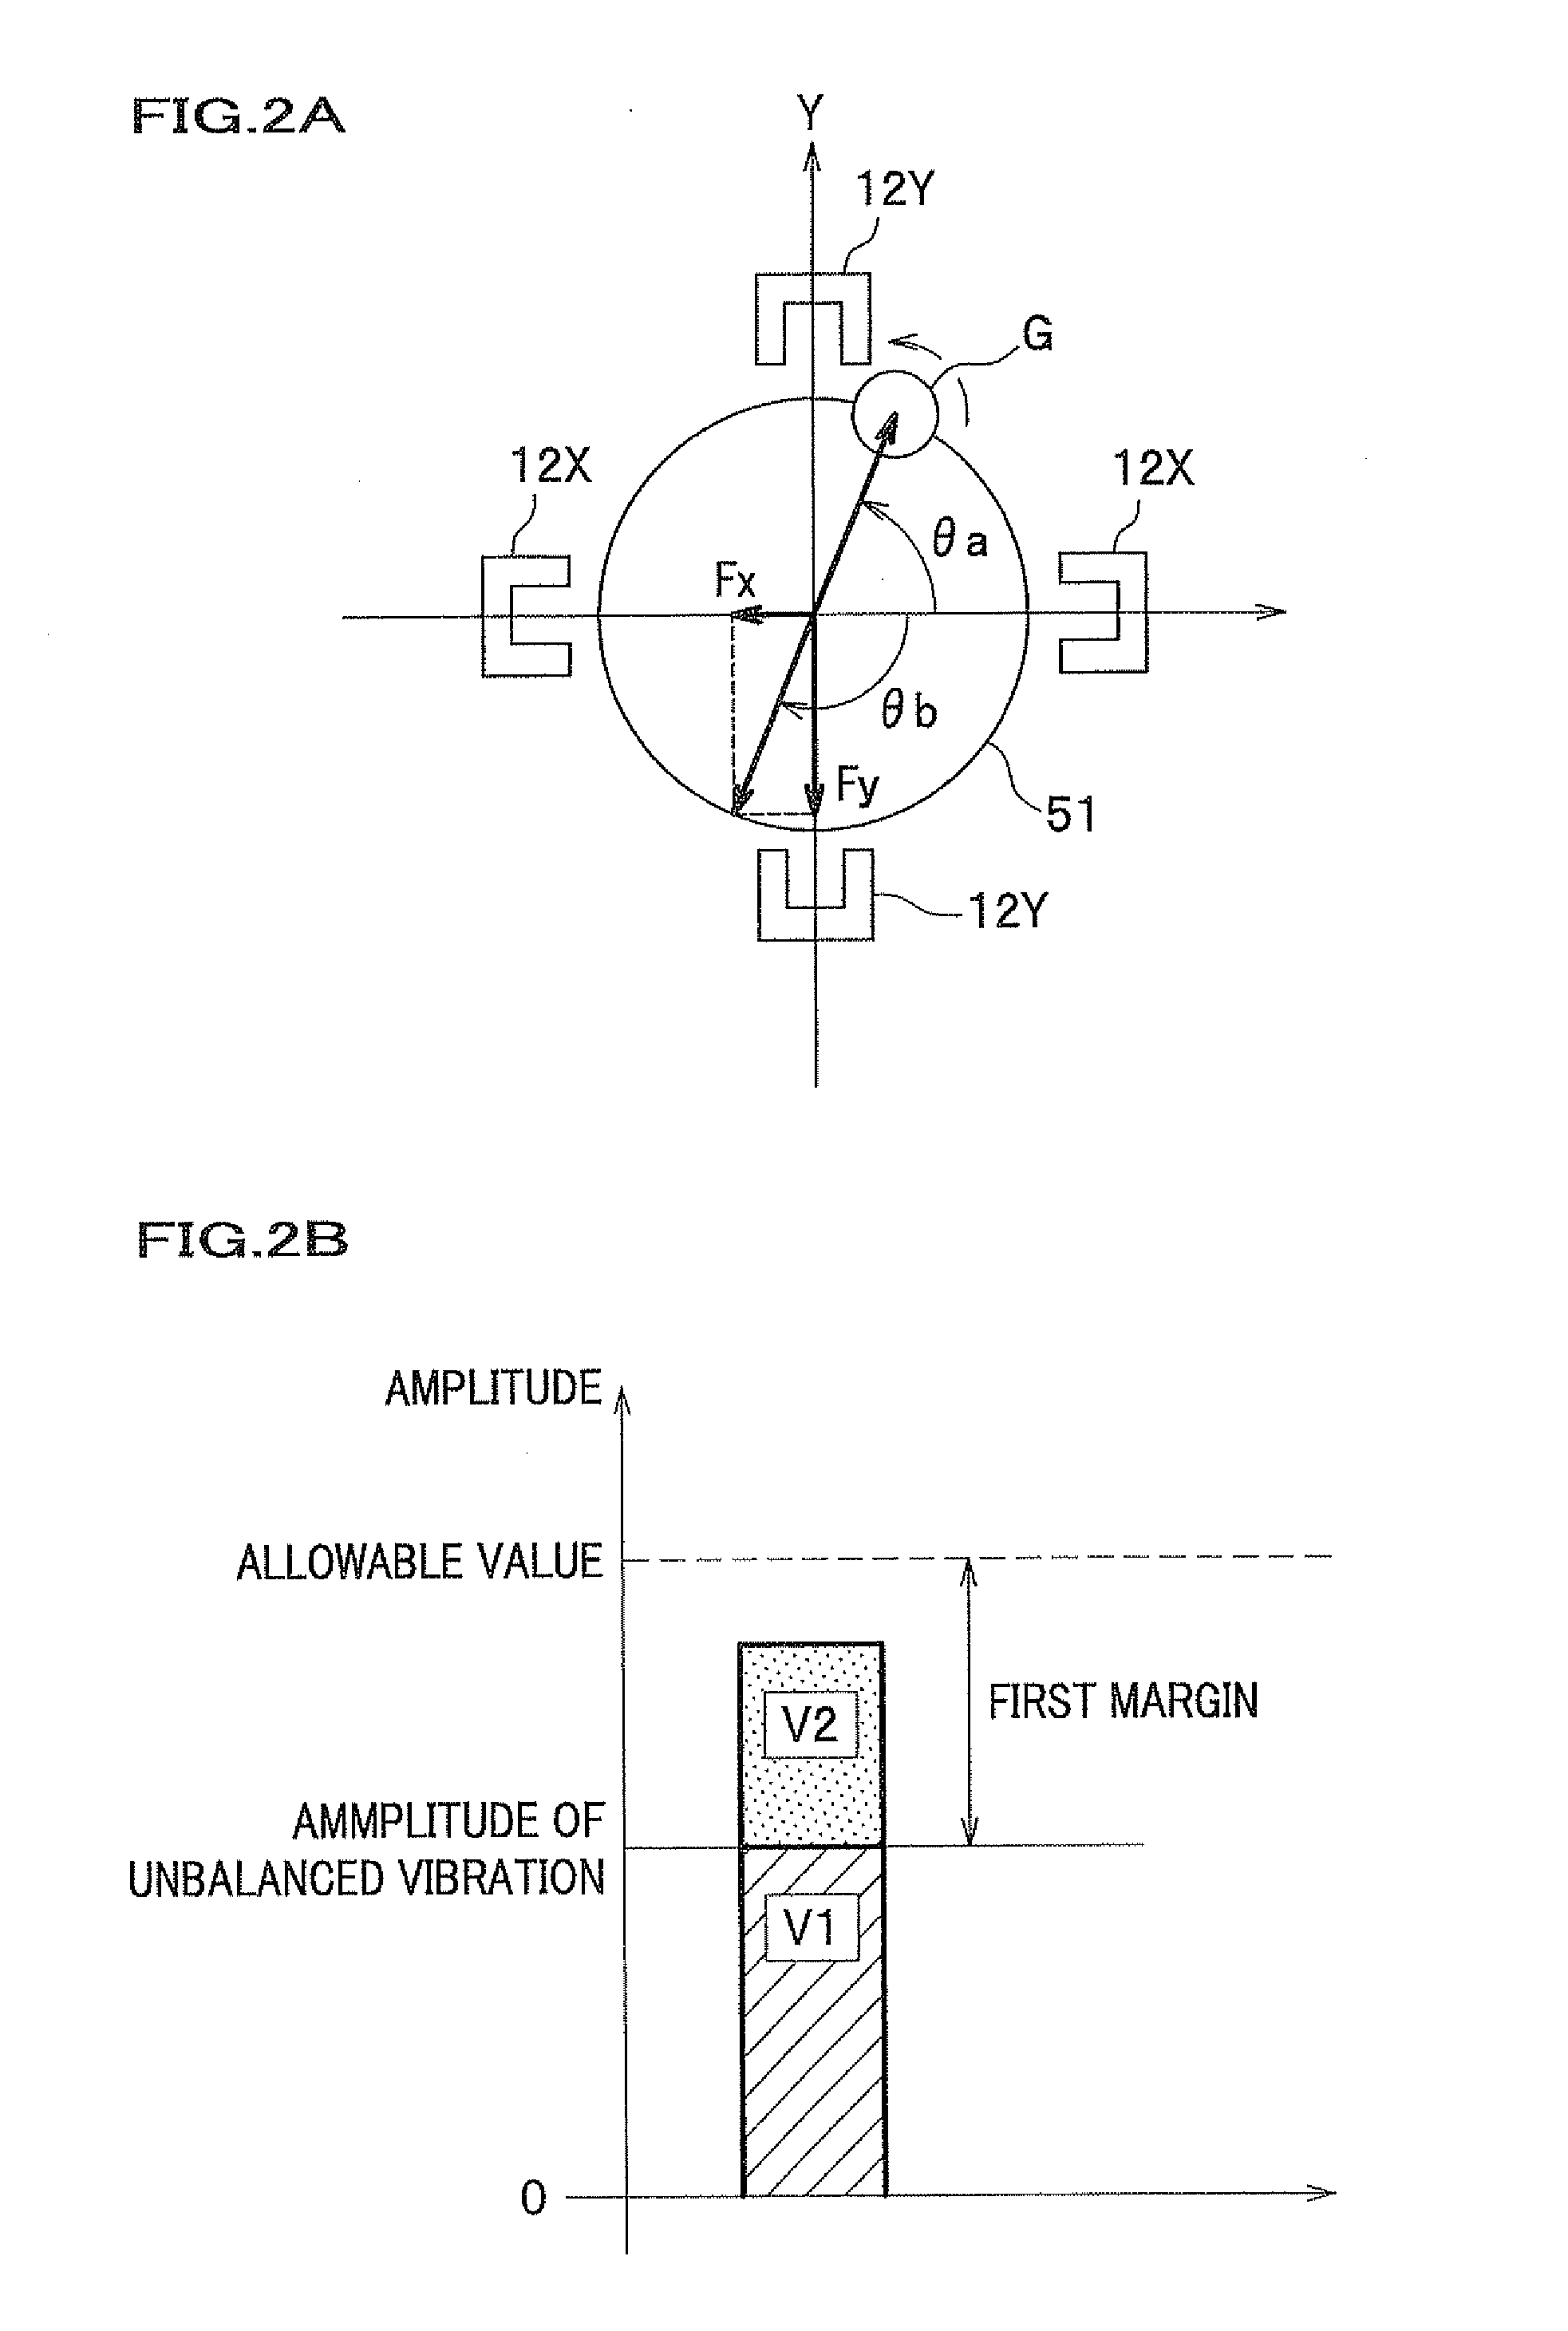 Apparatus and method for measuring vibration characteristics